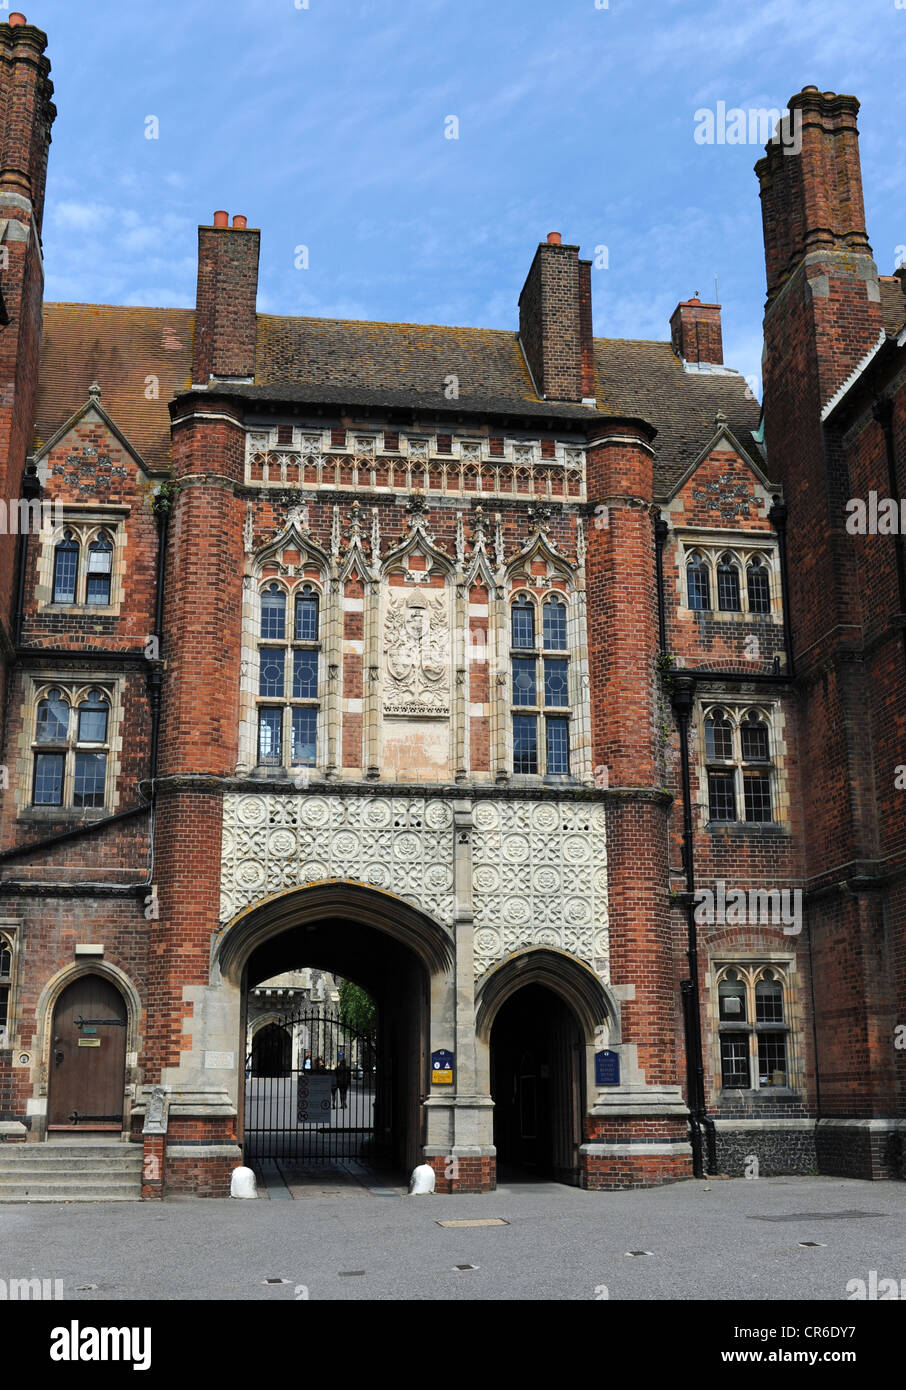 Brighton College Private Public School for Girls and Boys Sussex UK founded in 1845 Photo taken 2012 Stock Photo